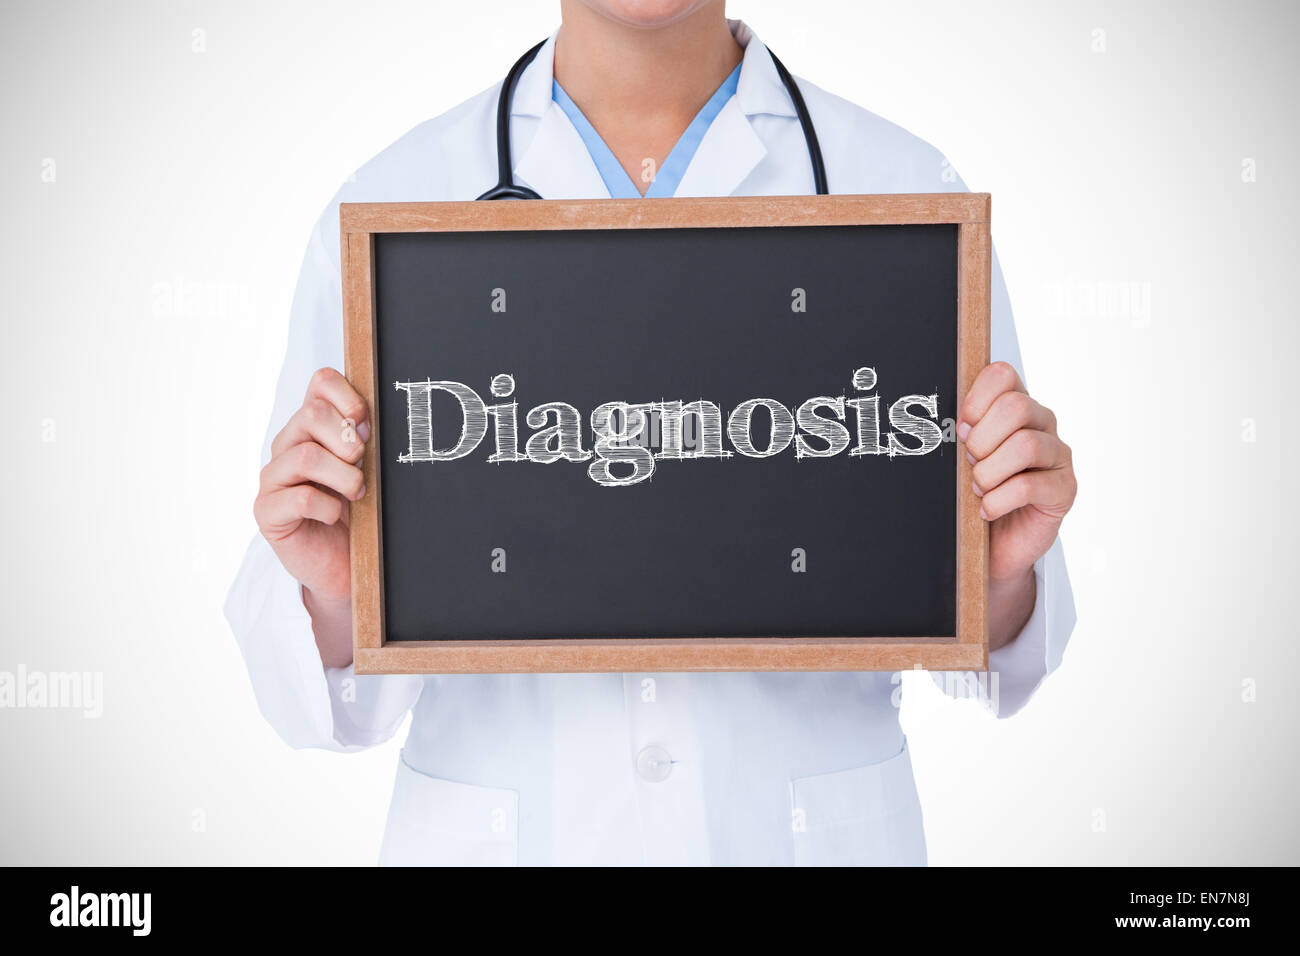 Diagnosis against doctor showing little blackboard Stock Photo